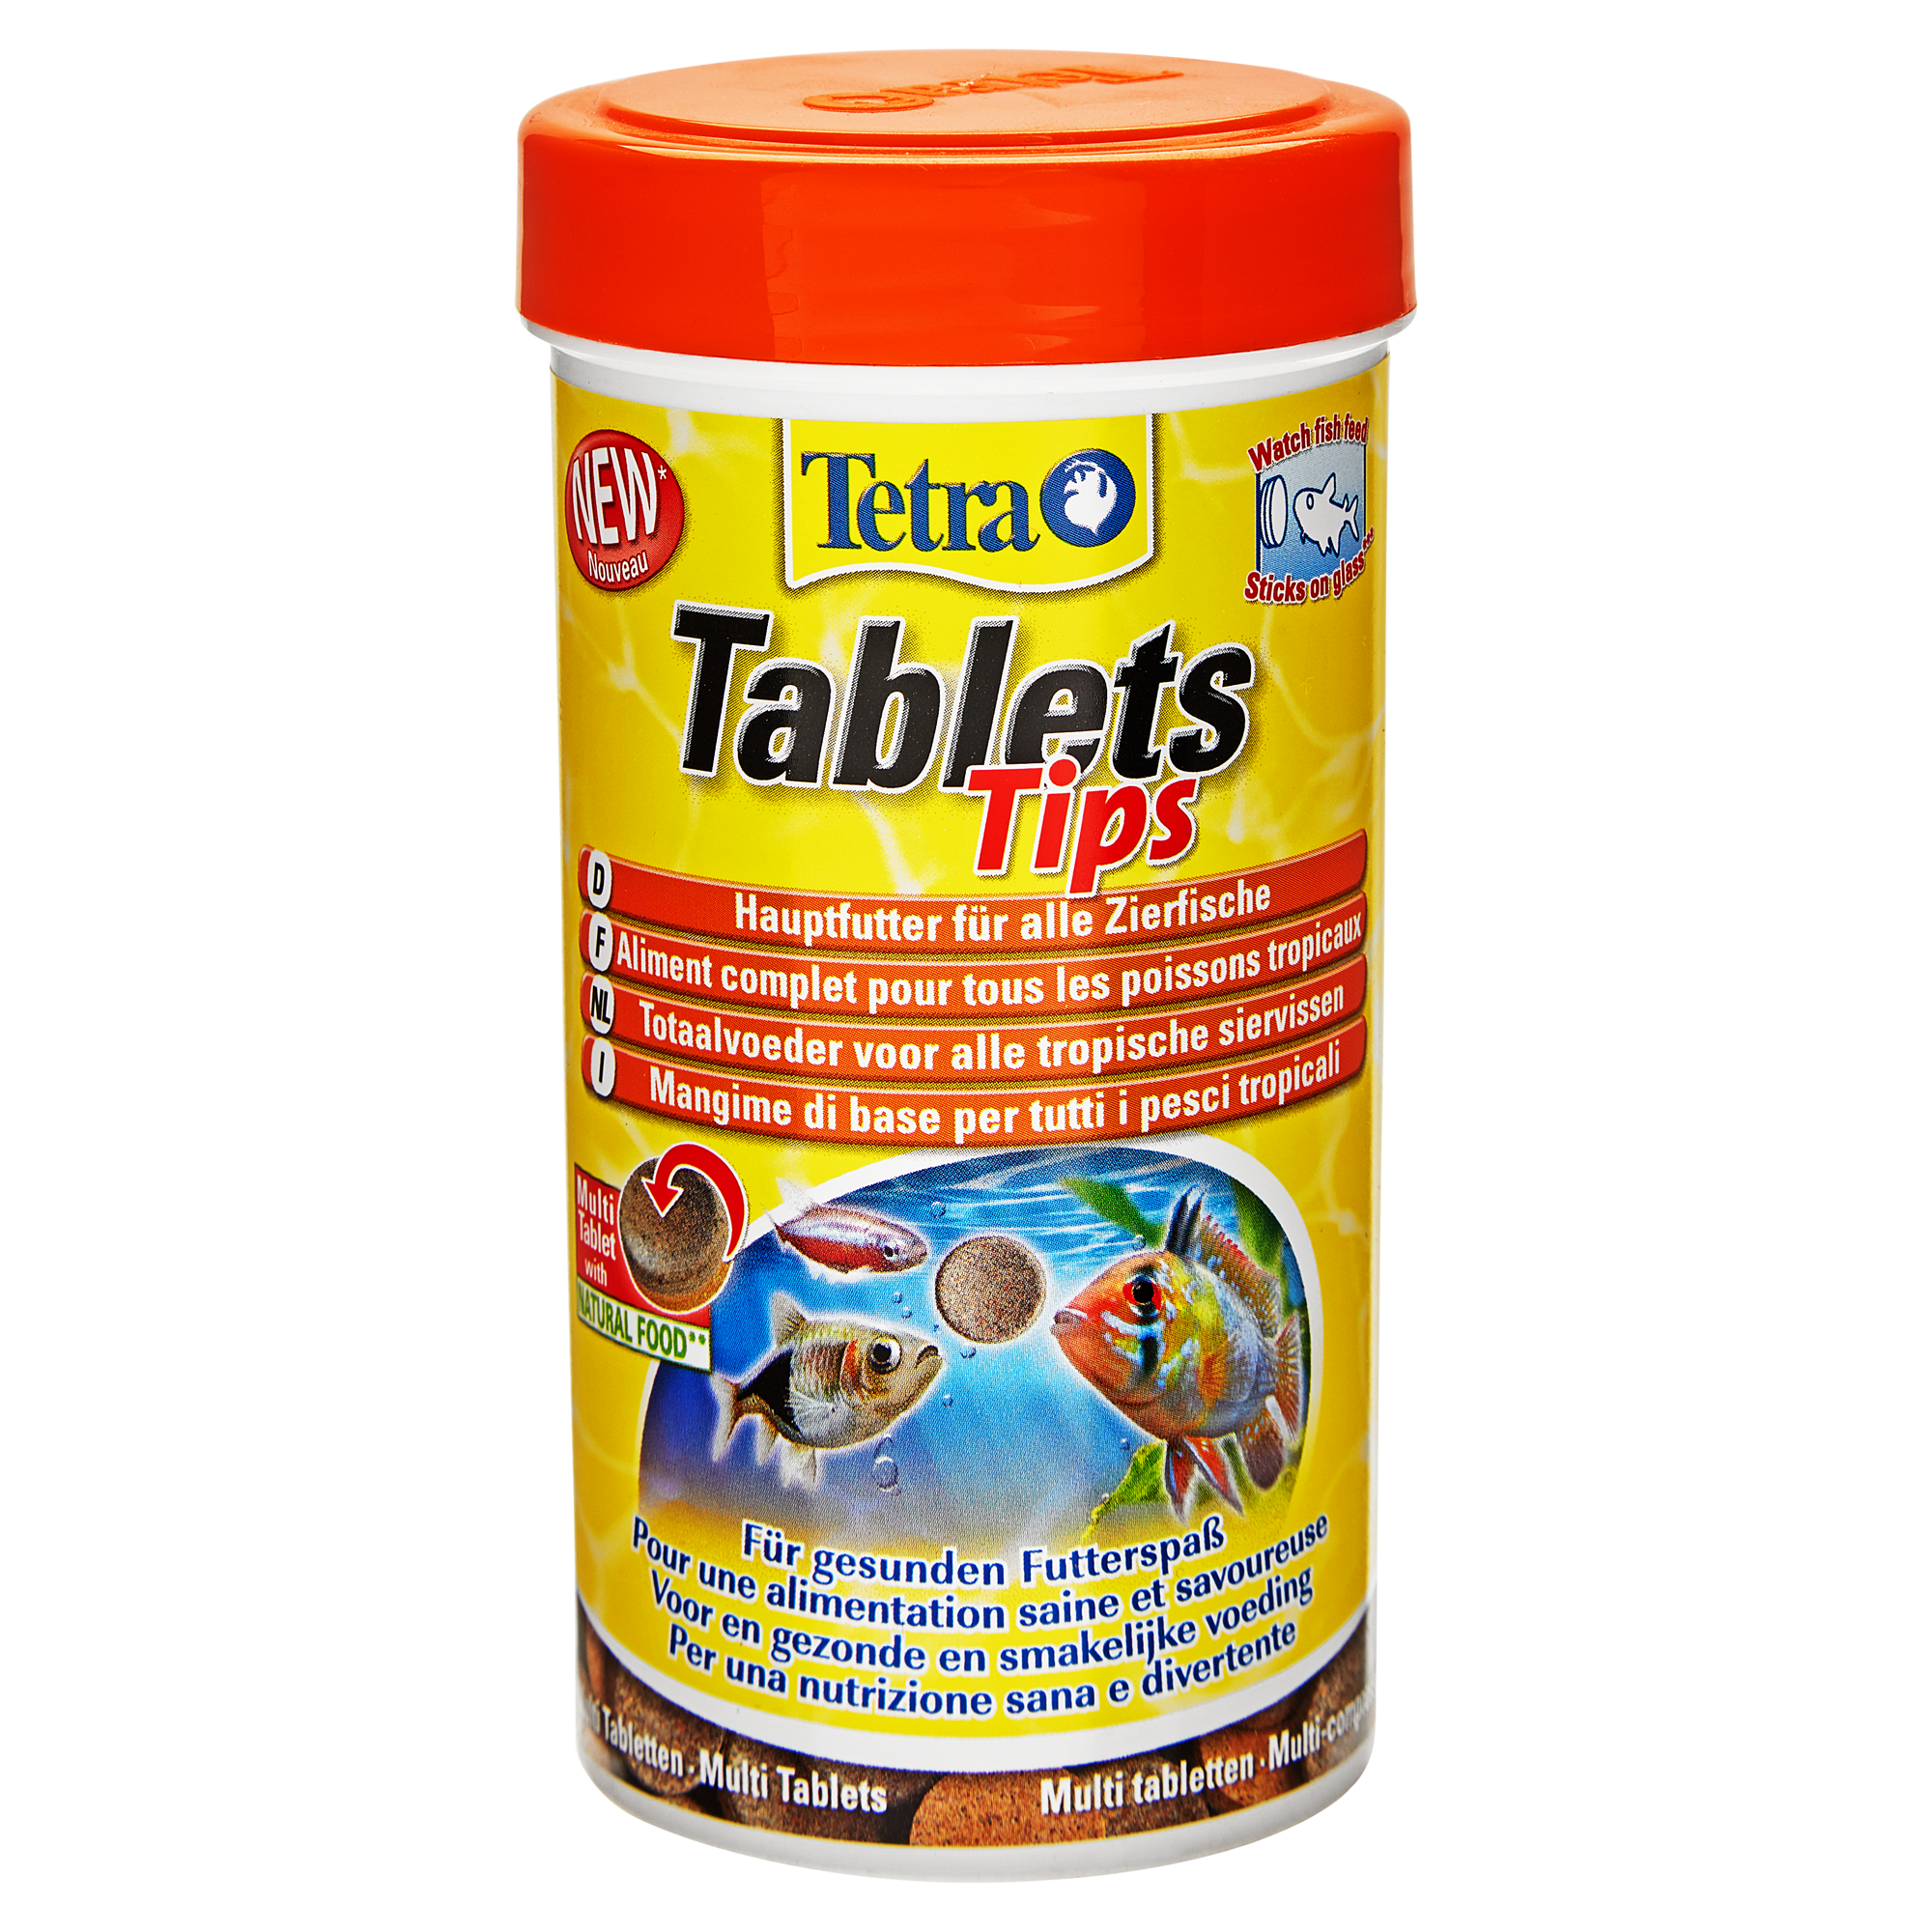 Fischfutter Tablets Tips 115 g + product picture